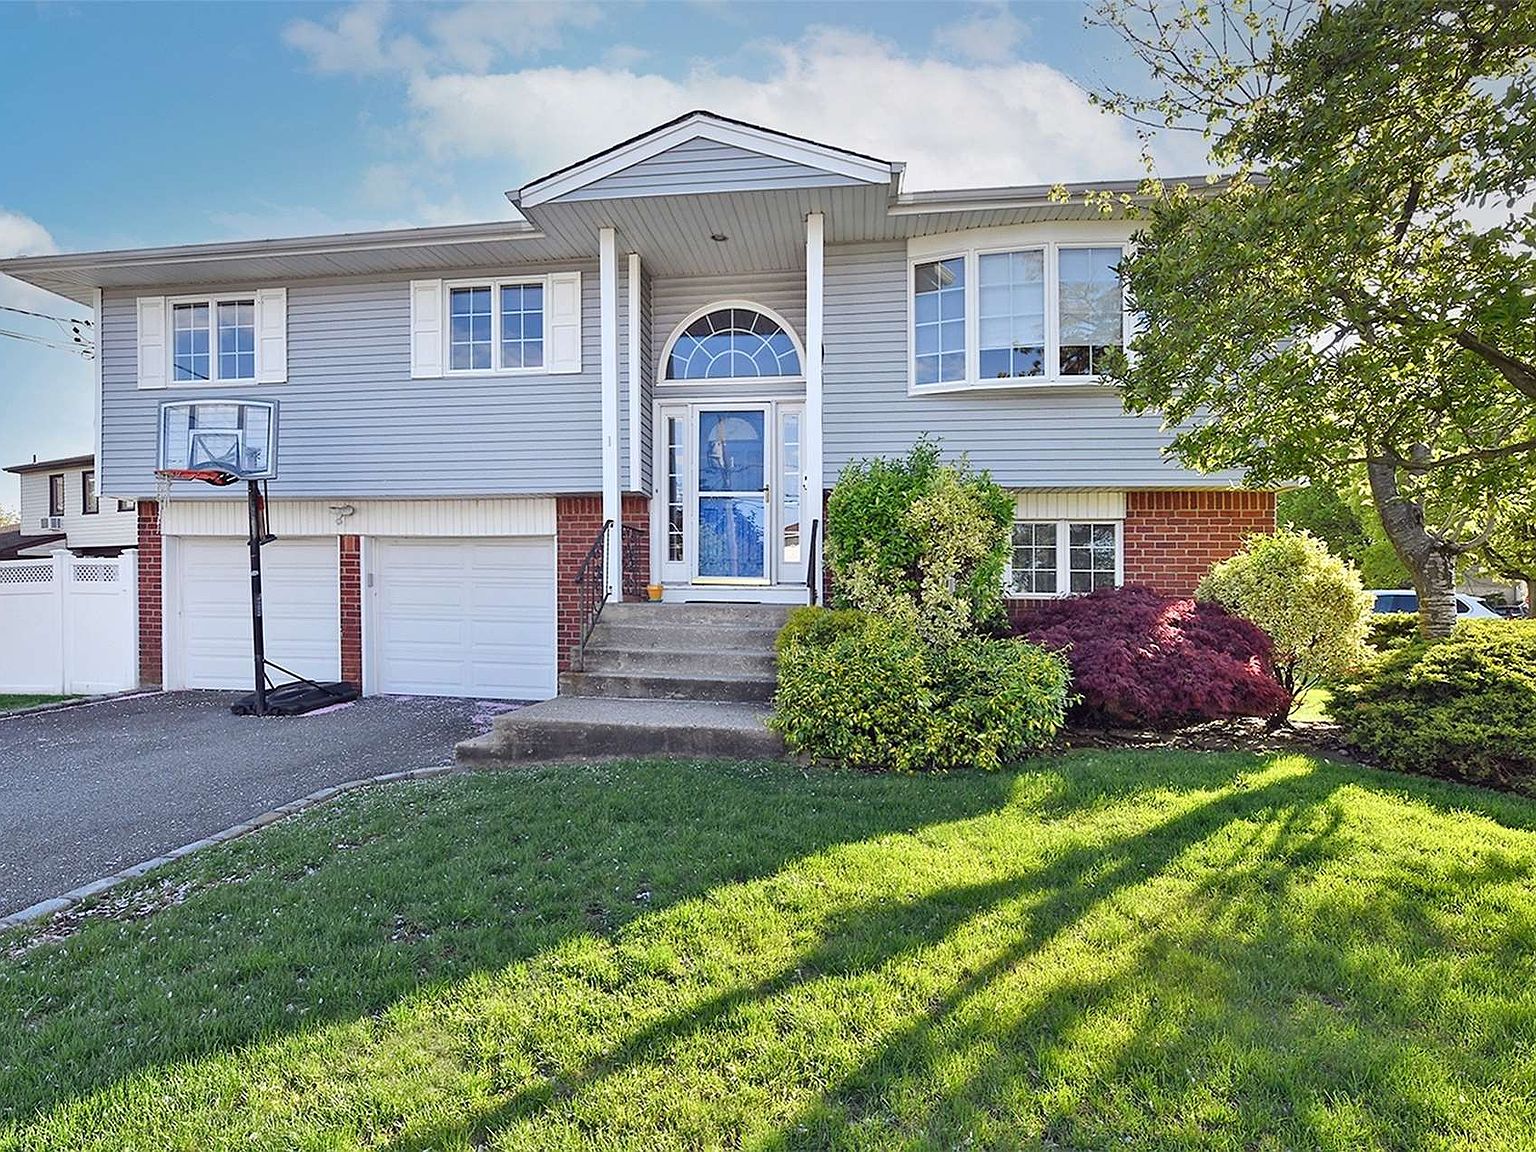 1 Sterling Court Plainview NY 11803 Zillow